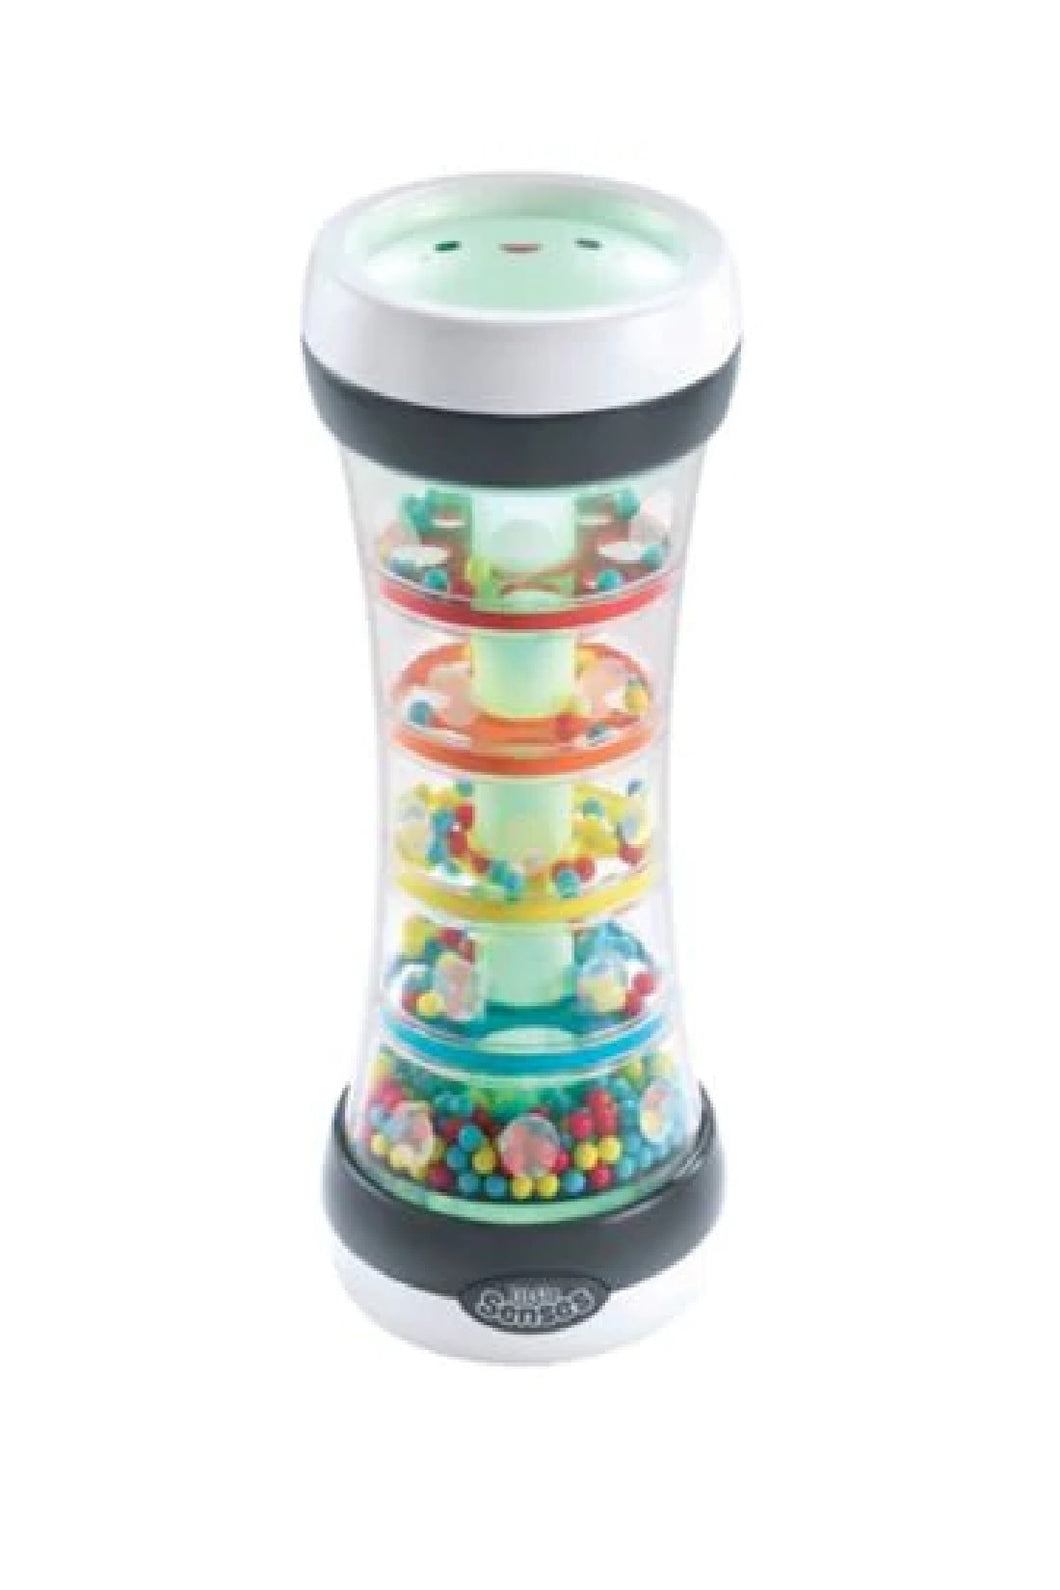 Early Learning Centre Little Senses Glowing Rainmaker